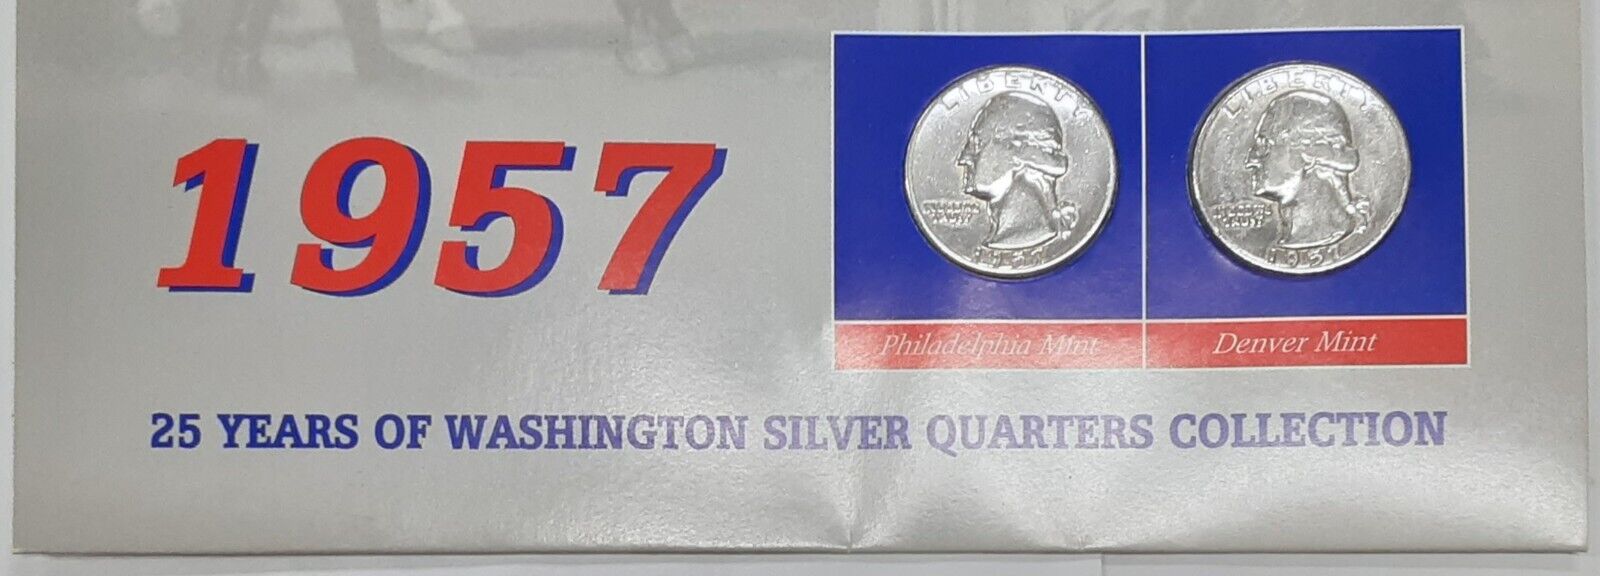 1957 Washington Elected 1st President Stamp & Silver Quarters Collection